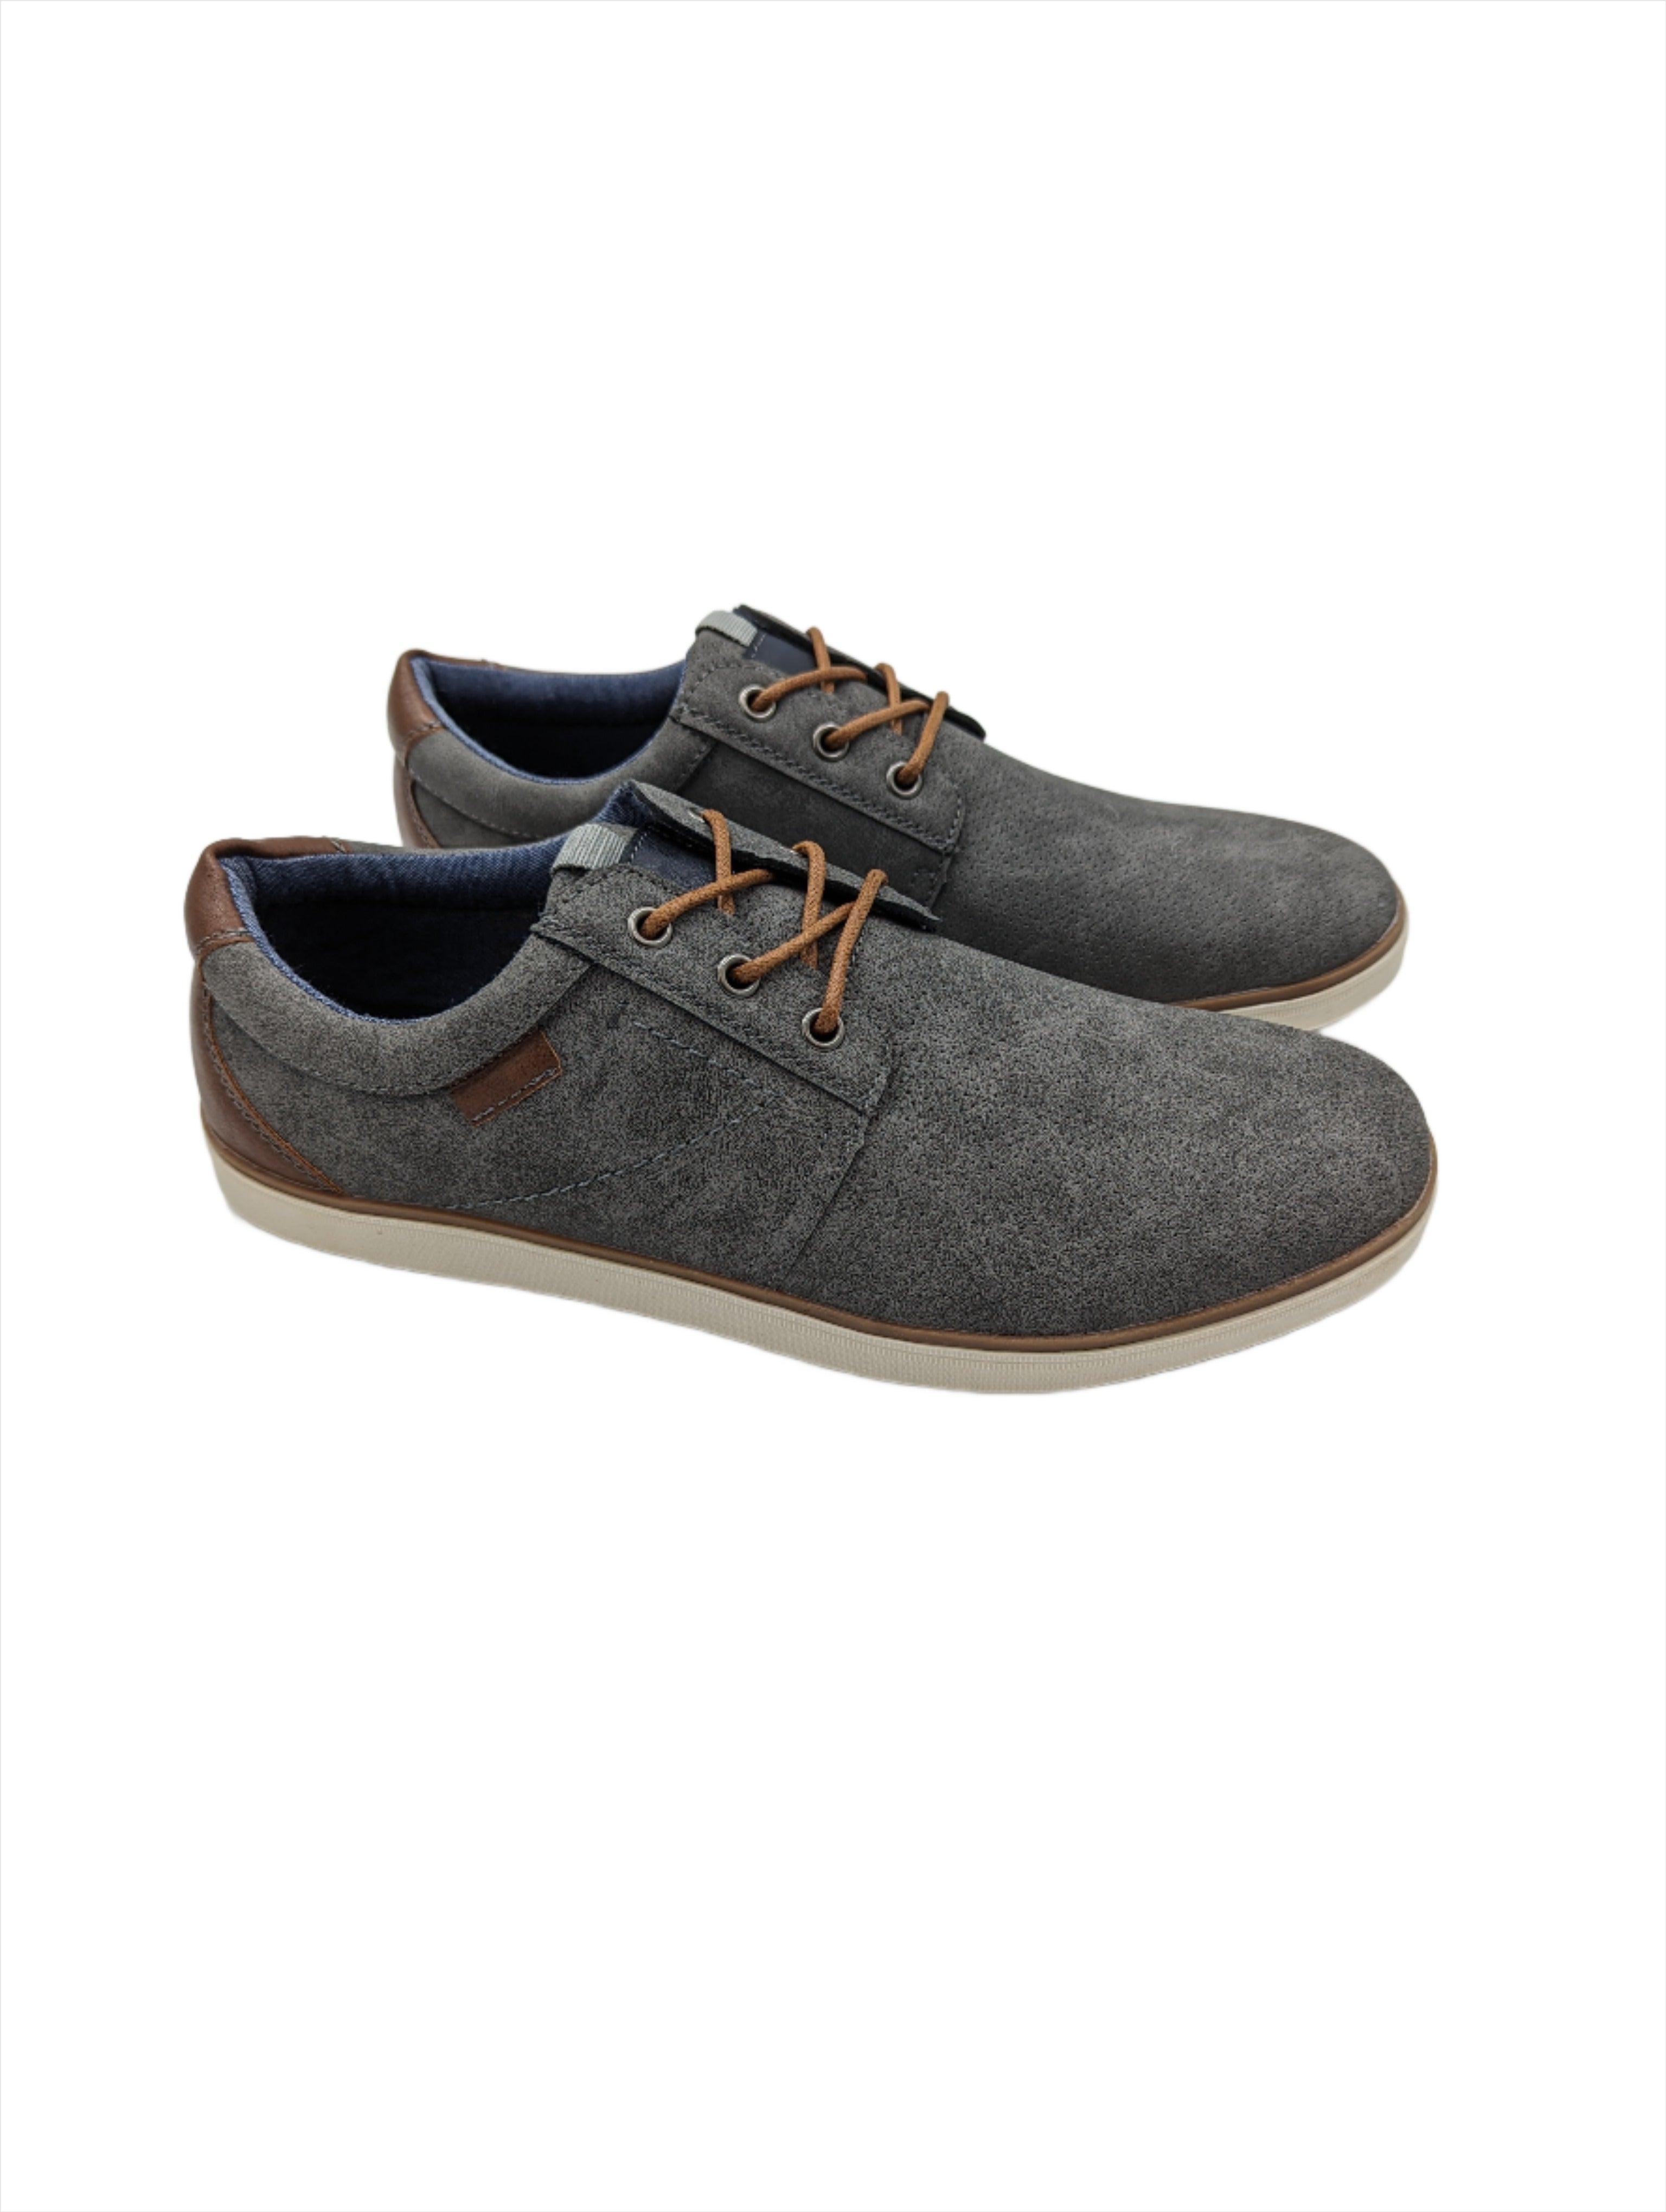 Arno Grey Lace Up Shoe-Right side view